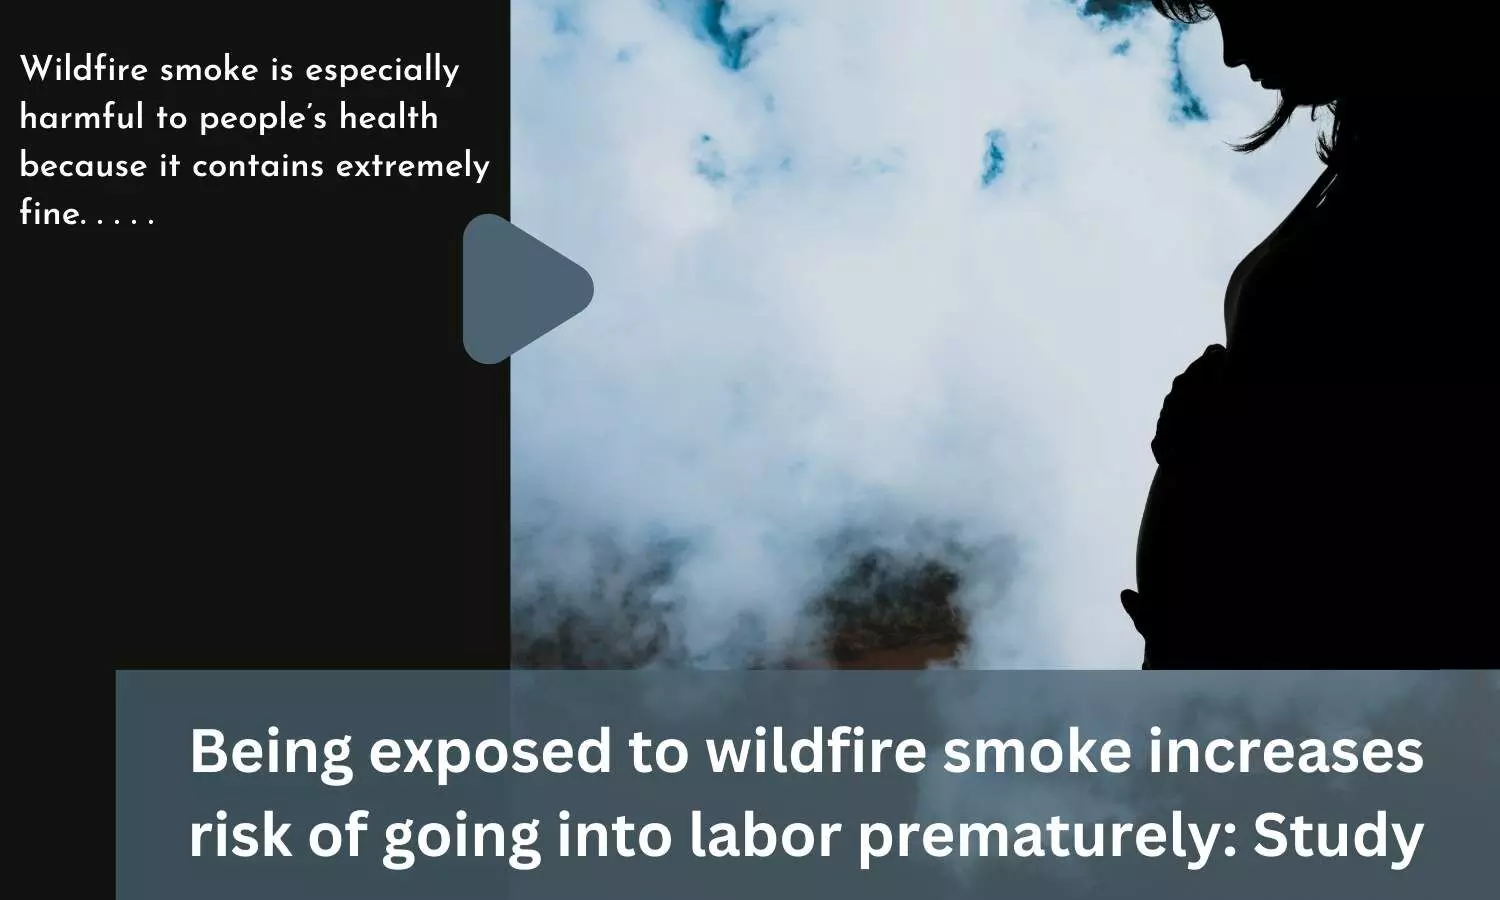 Being exposed to wildfire smoke increases risk of going into labor prematurely: Study